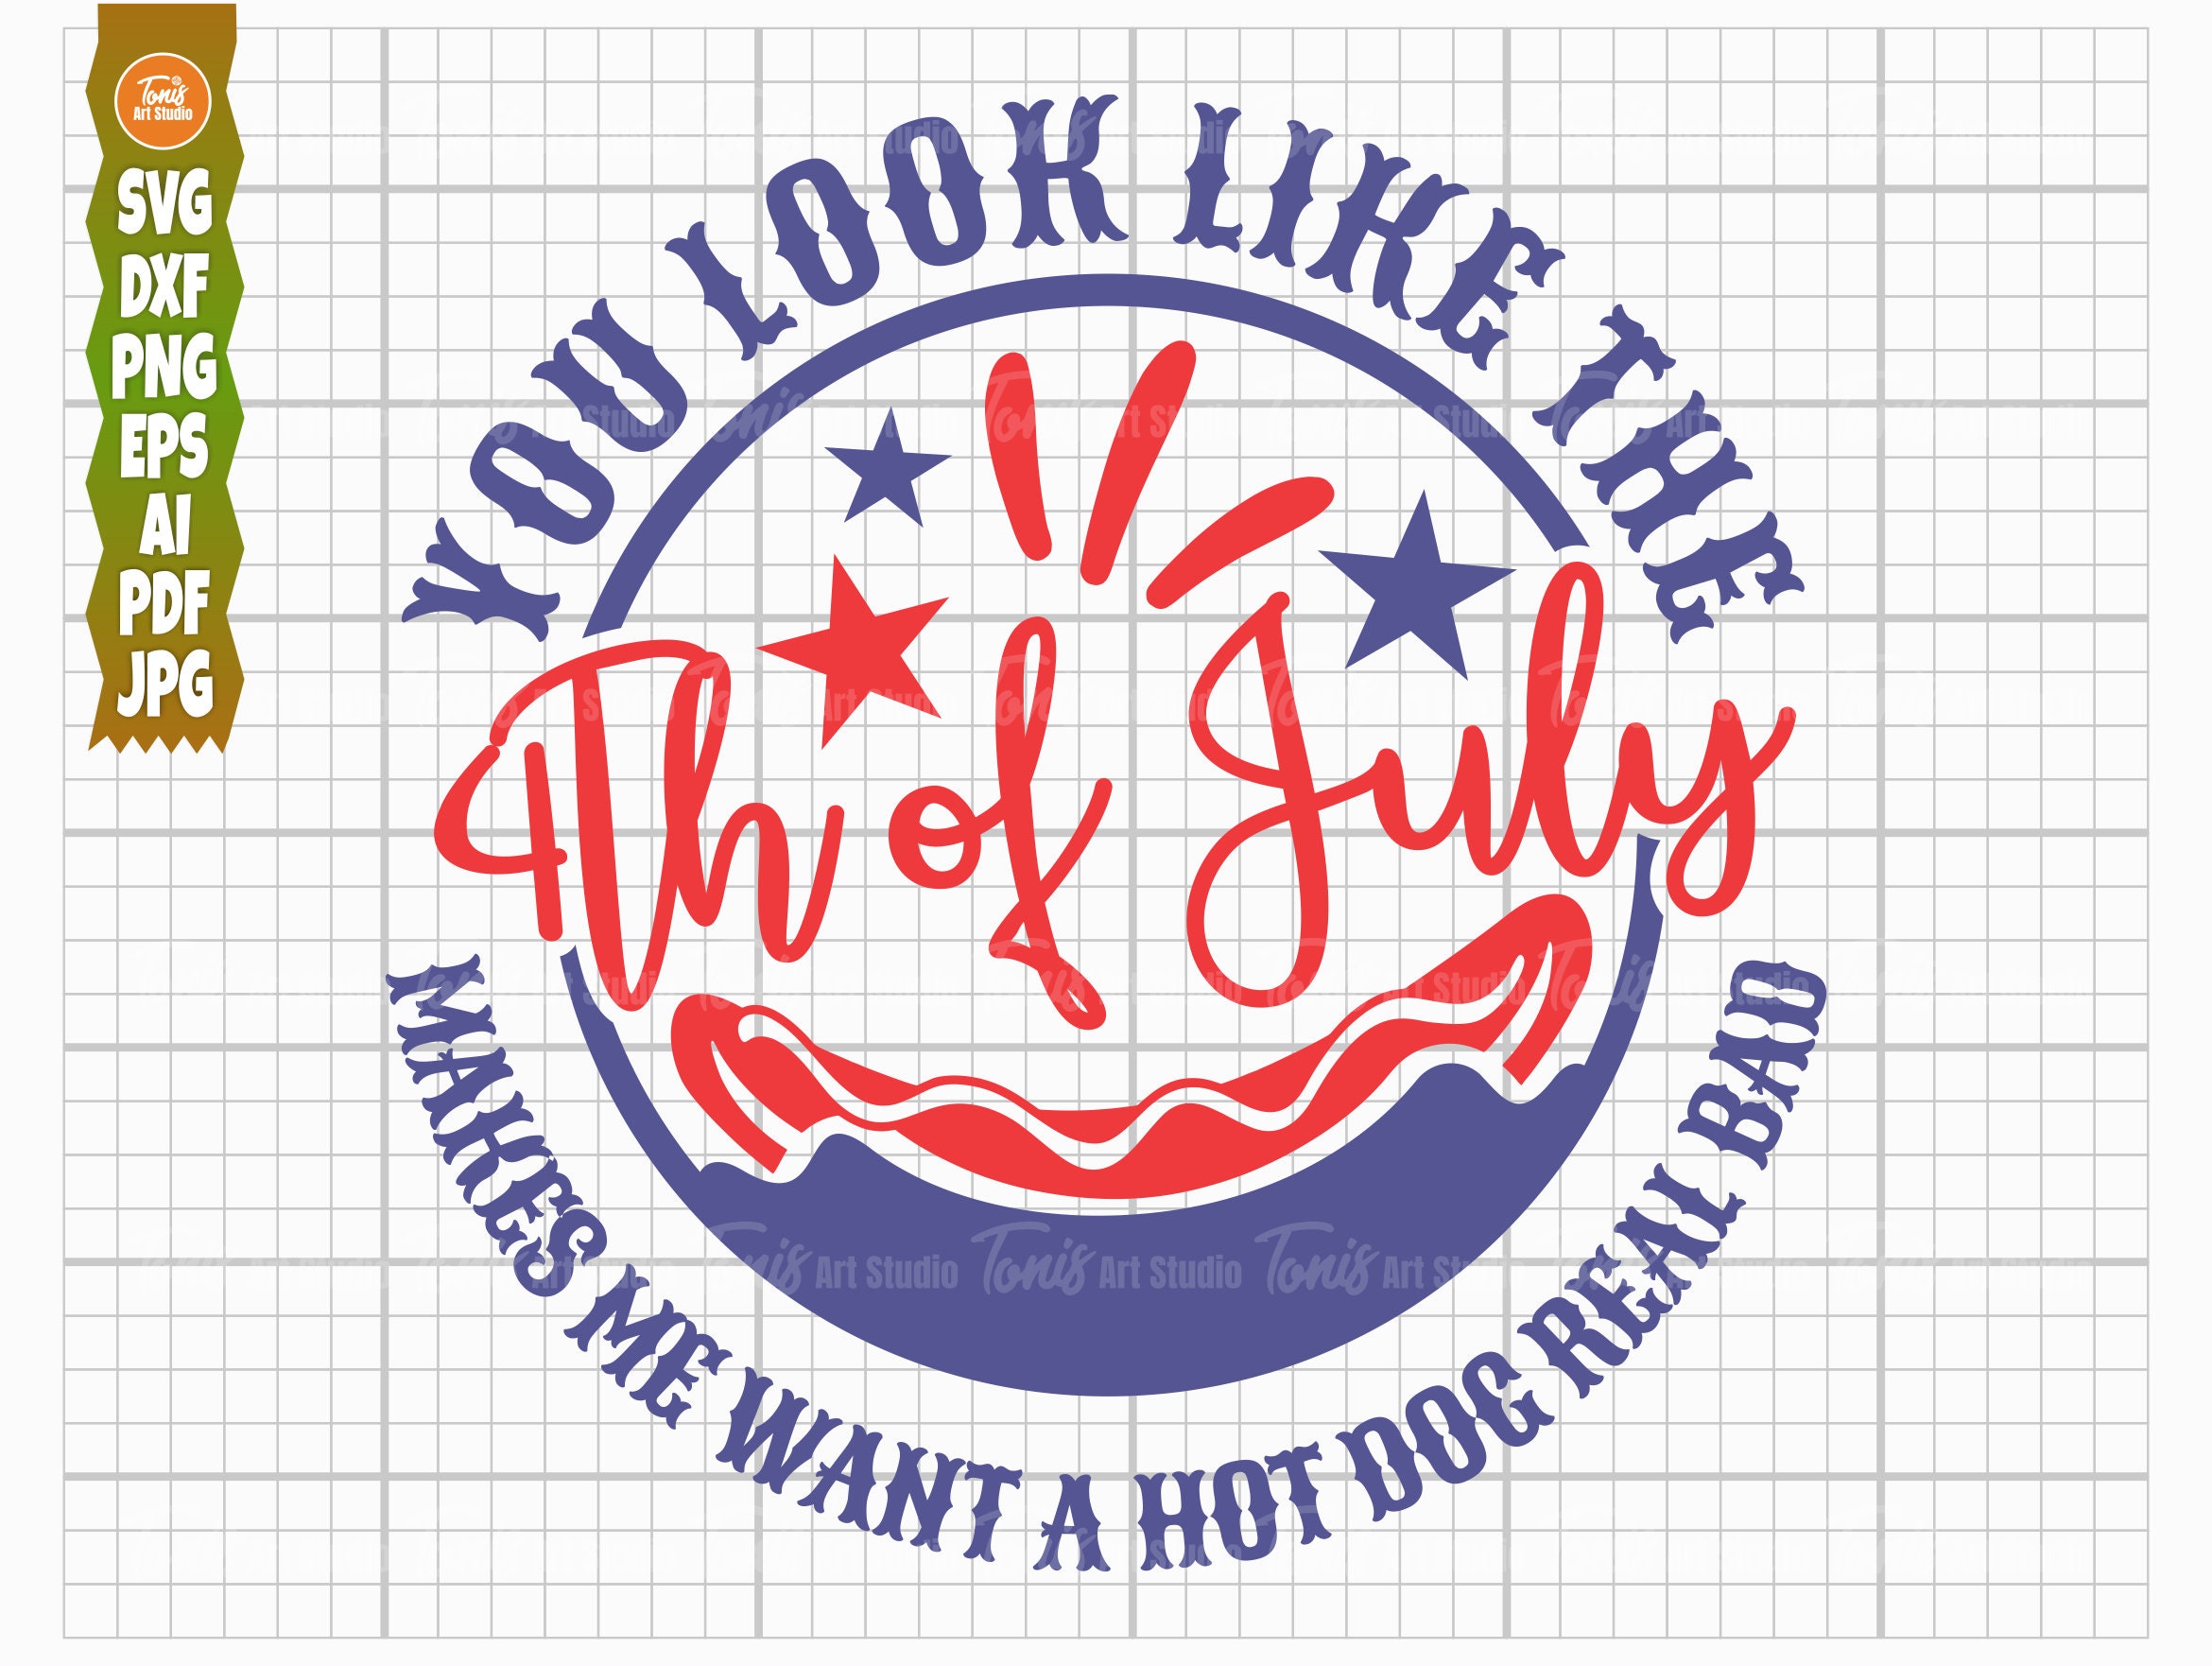 You look like the 4th of july SVG, Makes Me Want a Hot Dog Real Bad